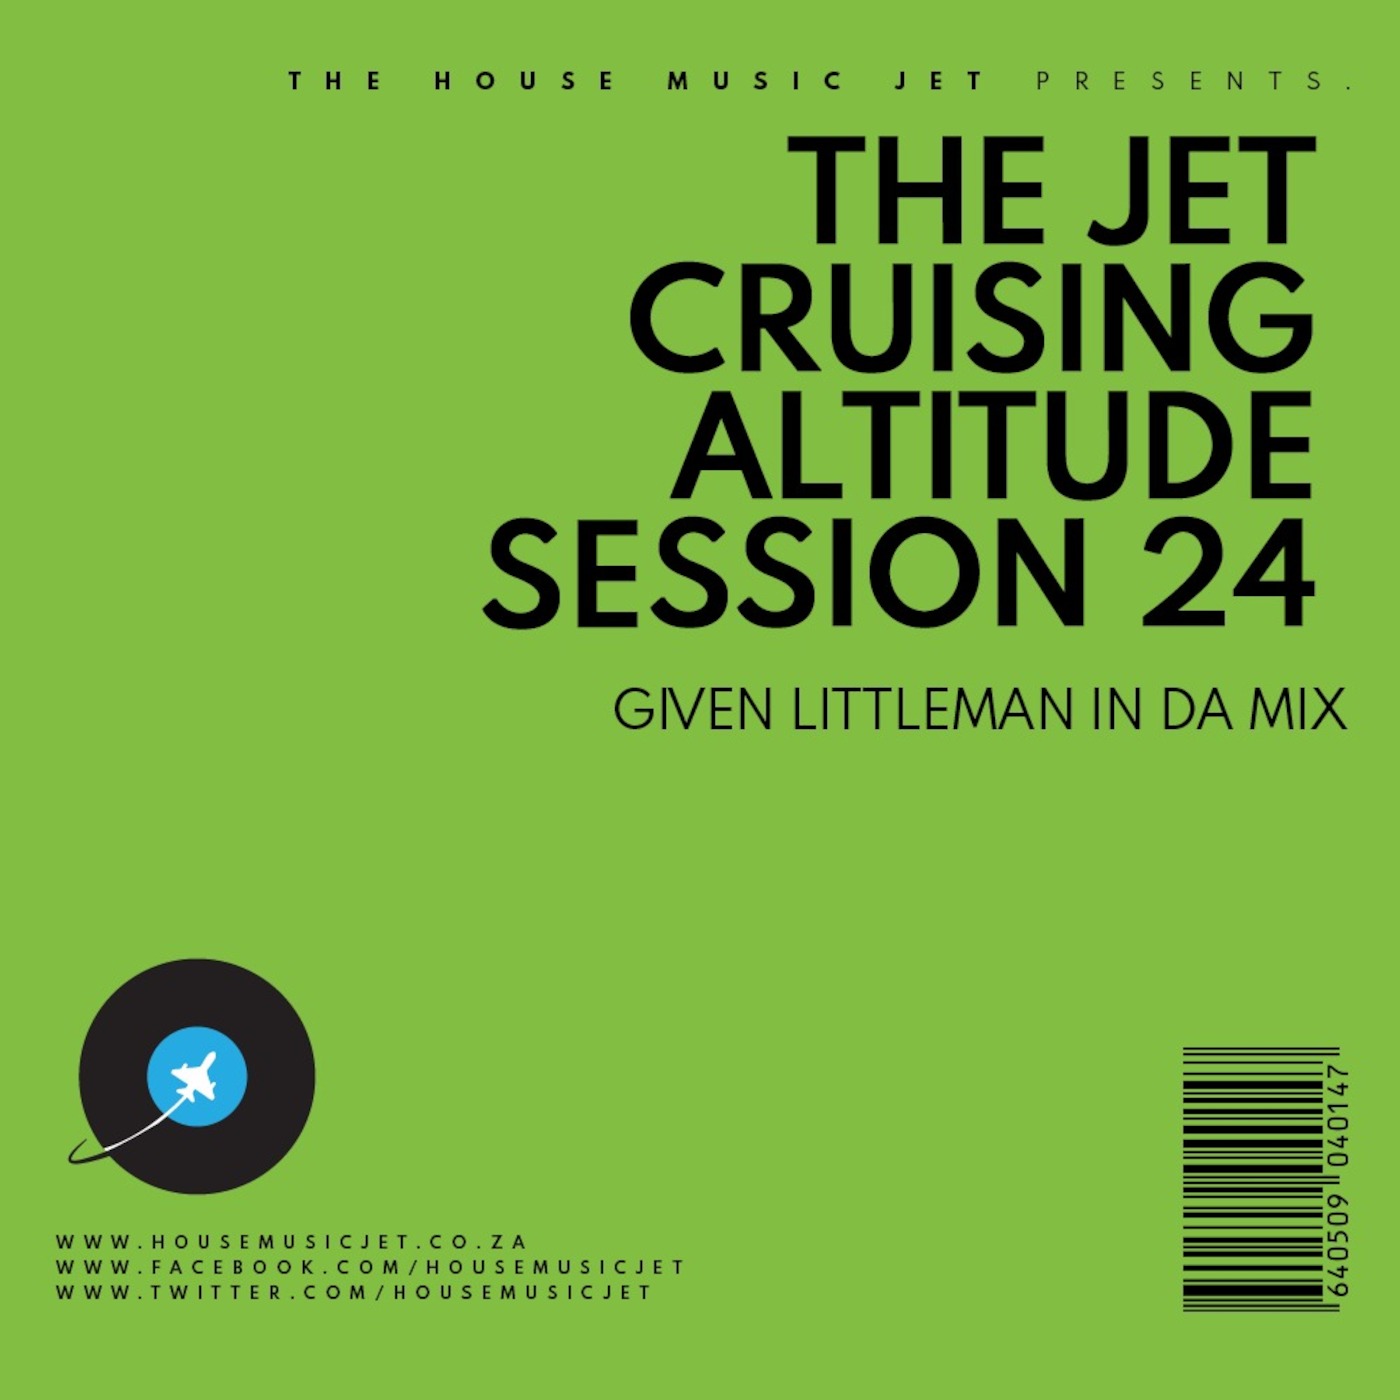 Given Littleman In Da Mix - The Jet Cruising Altitude Session 24